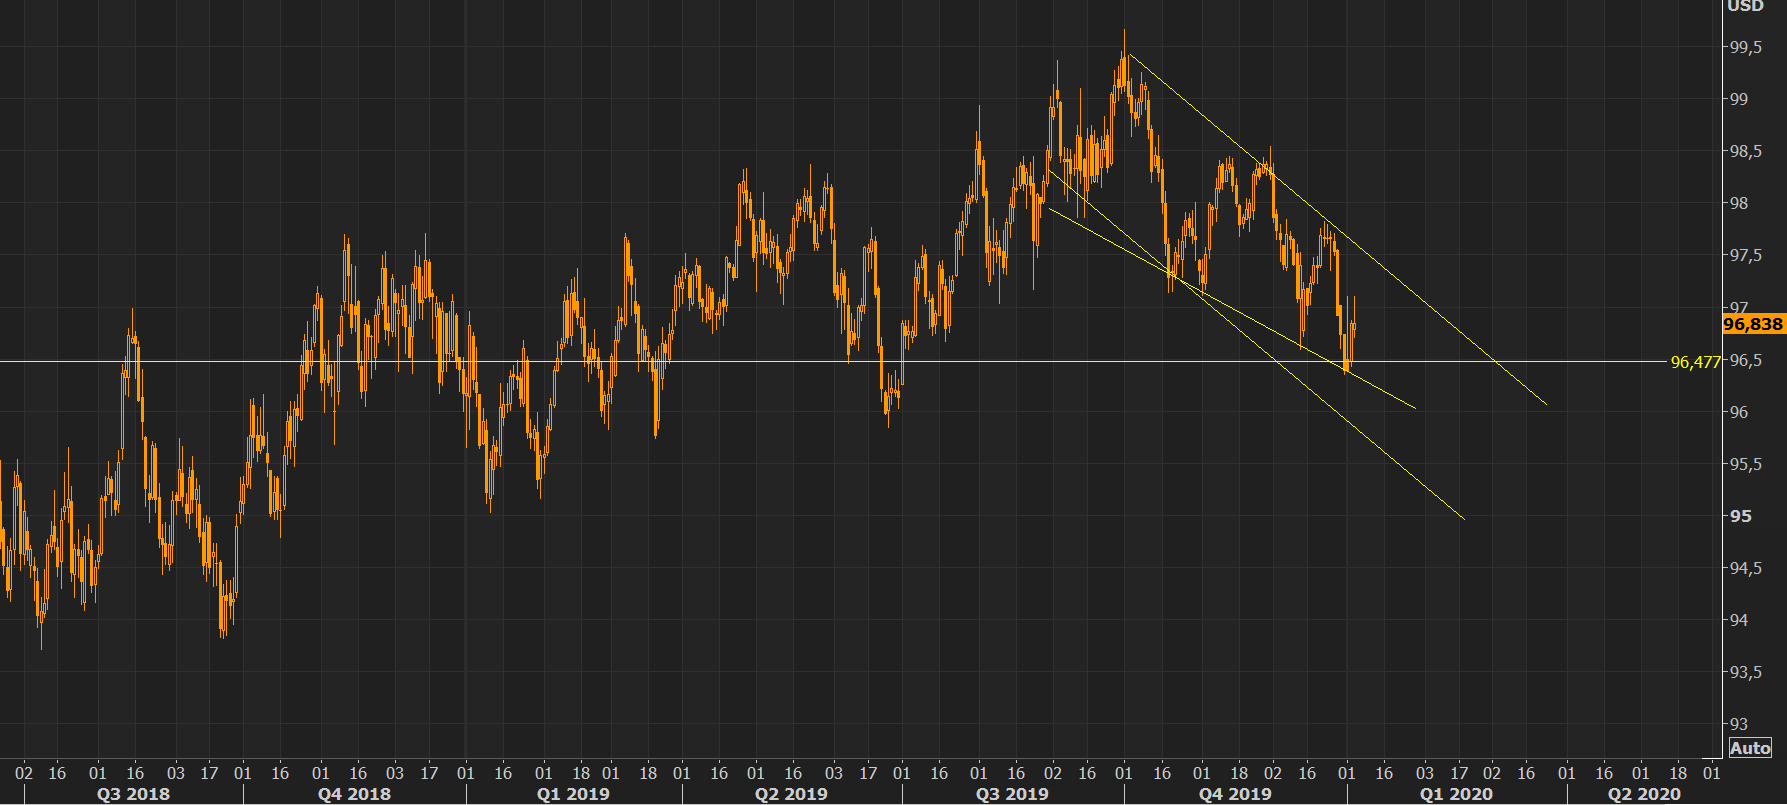 USD - trend channel lower or a wedge in the making?